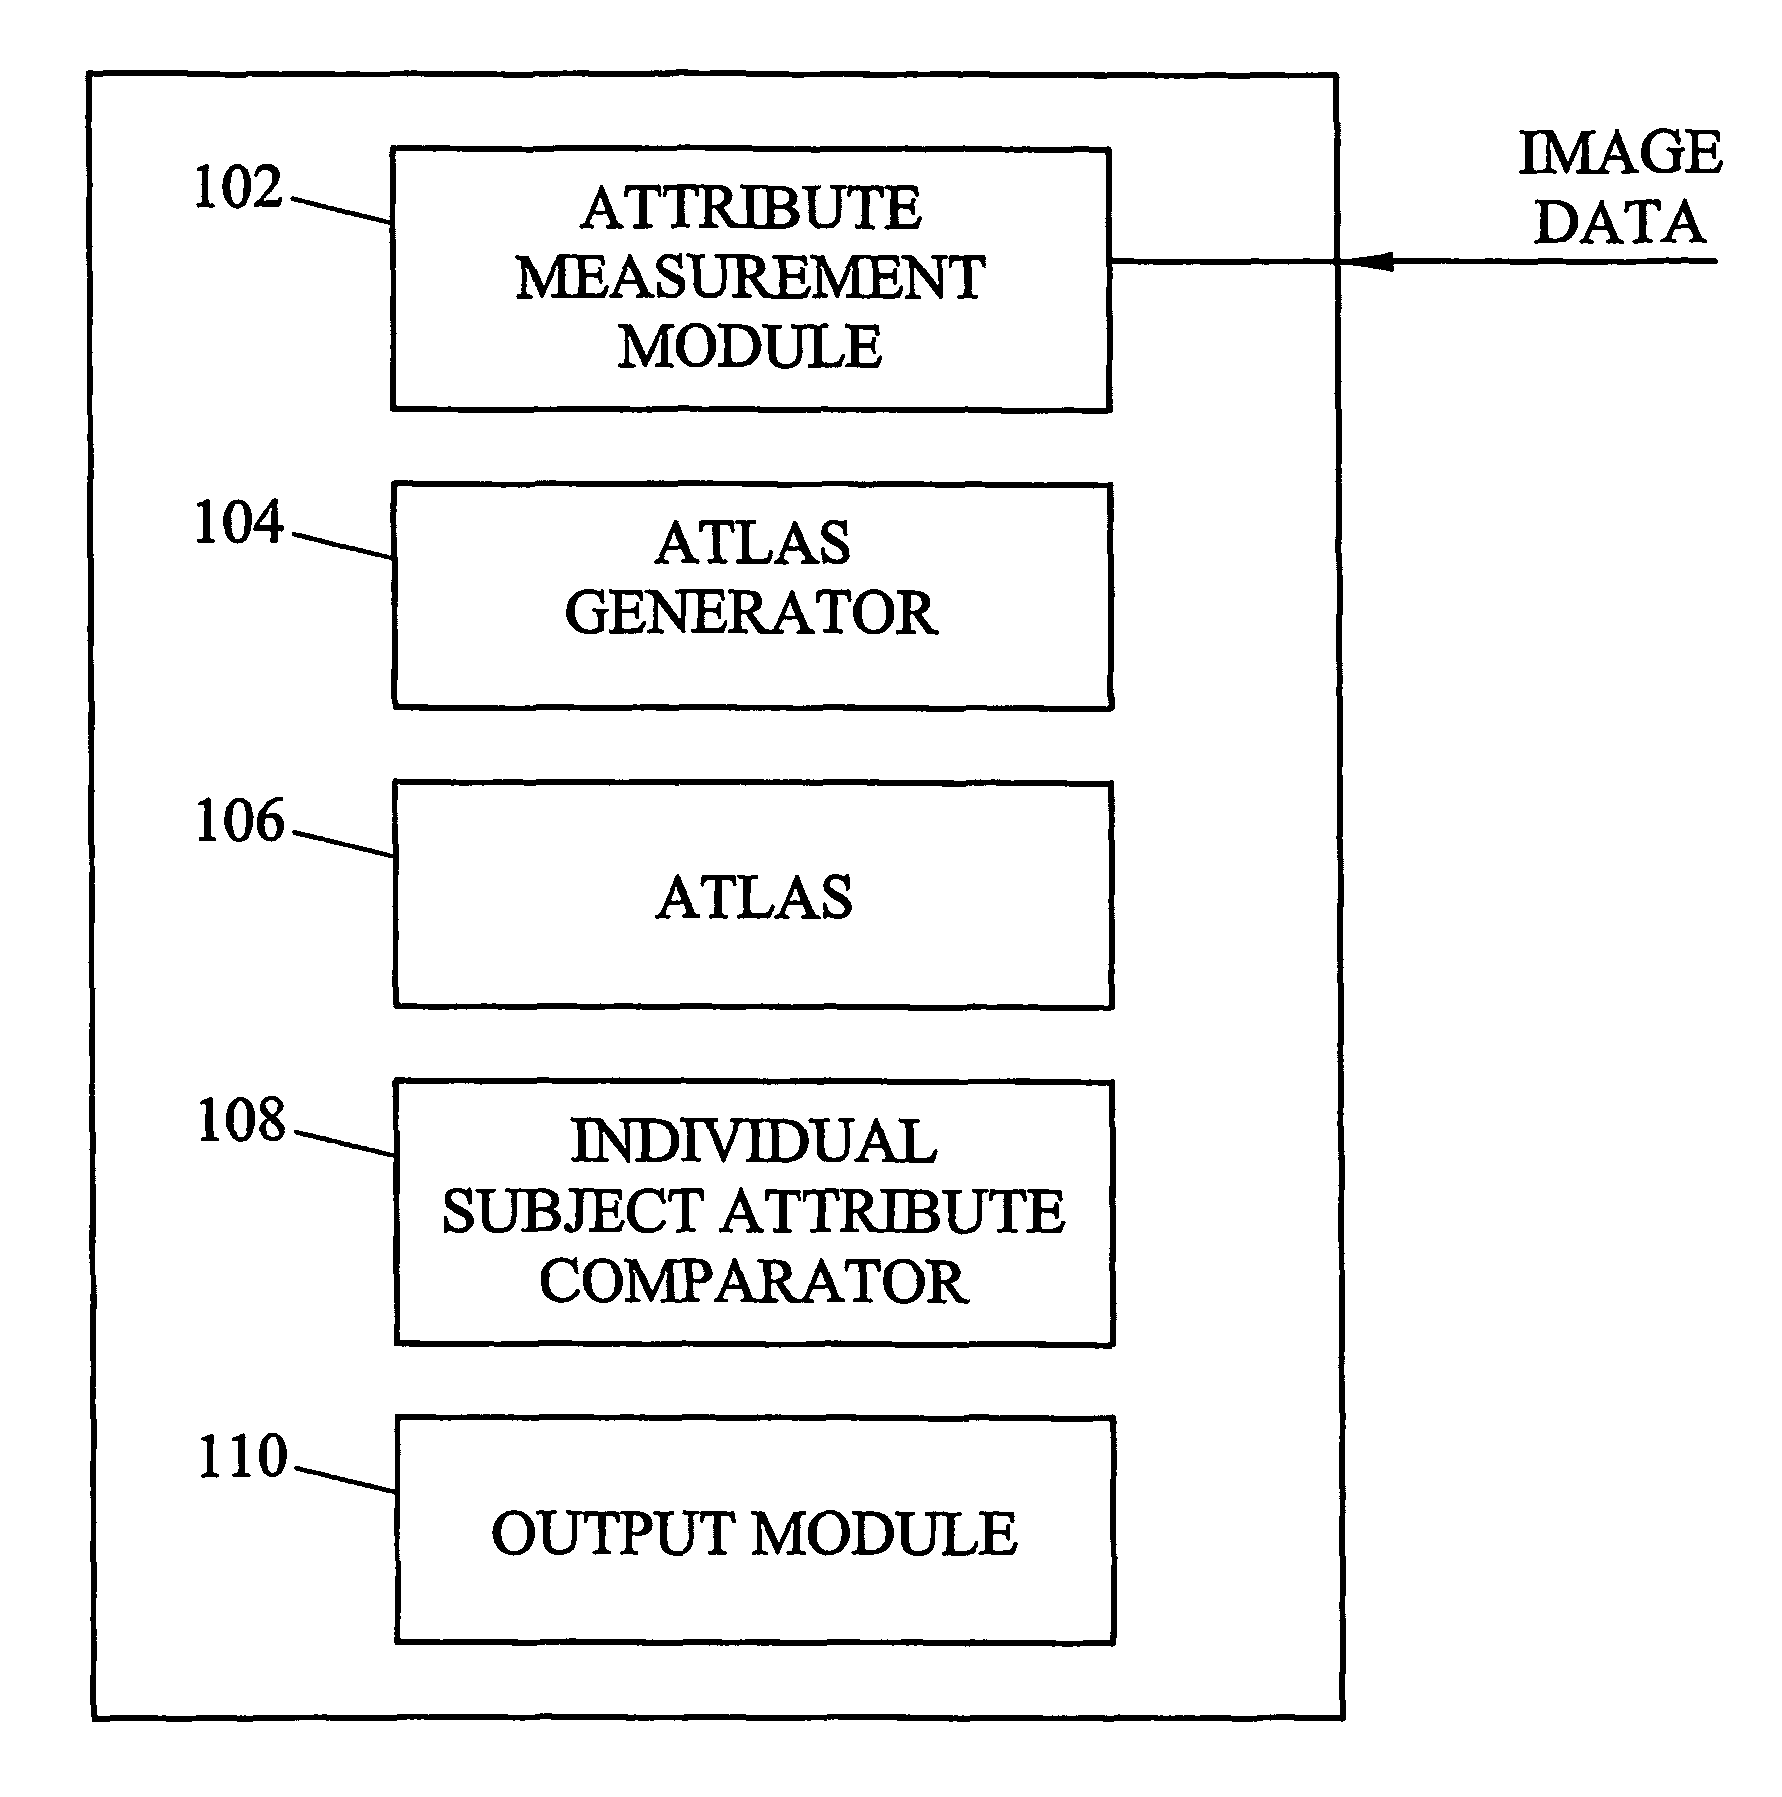 Systems, methods, and computer program products for analysis of vessel attributes for diagnosis, disease staging, and surgical planning